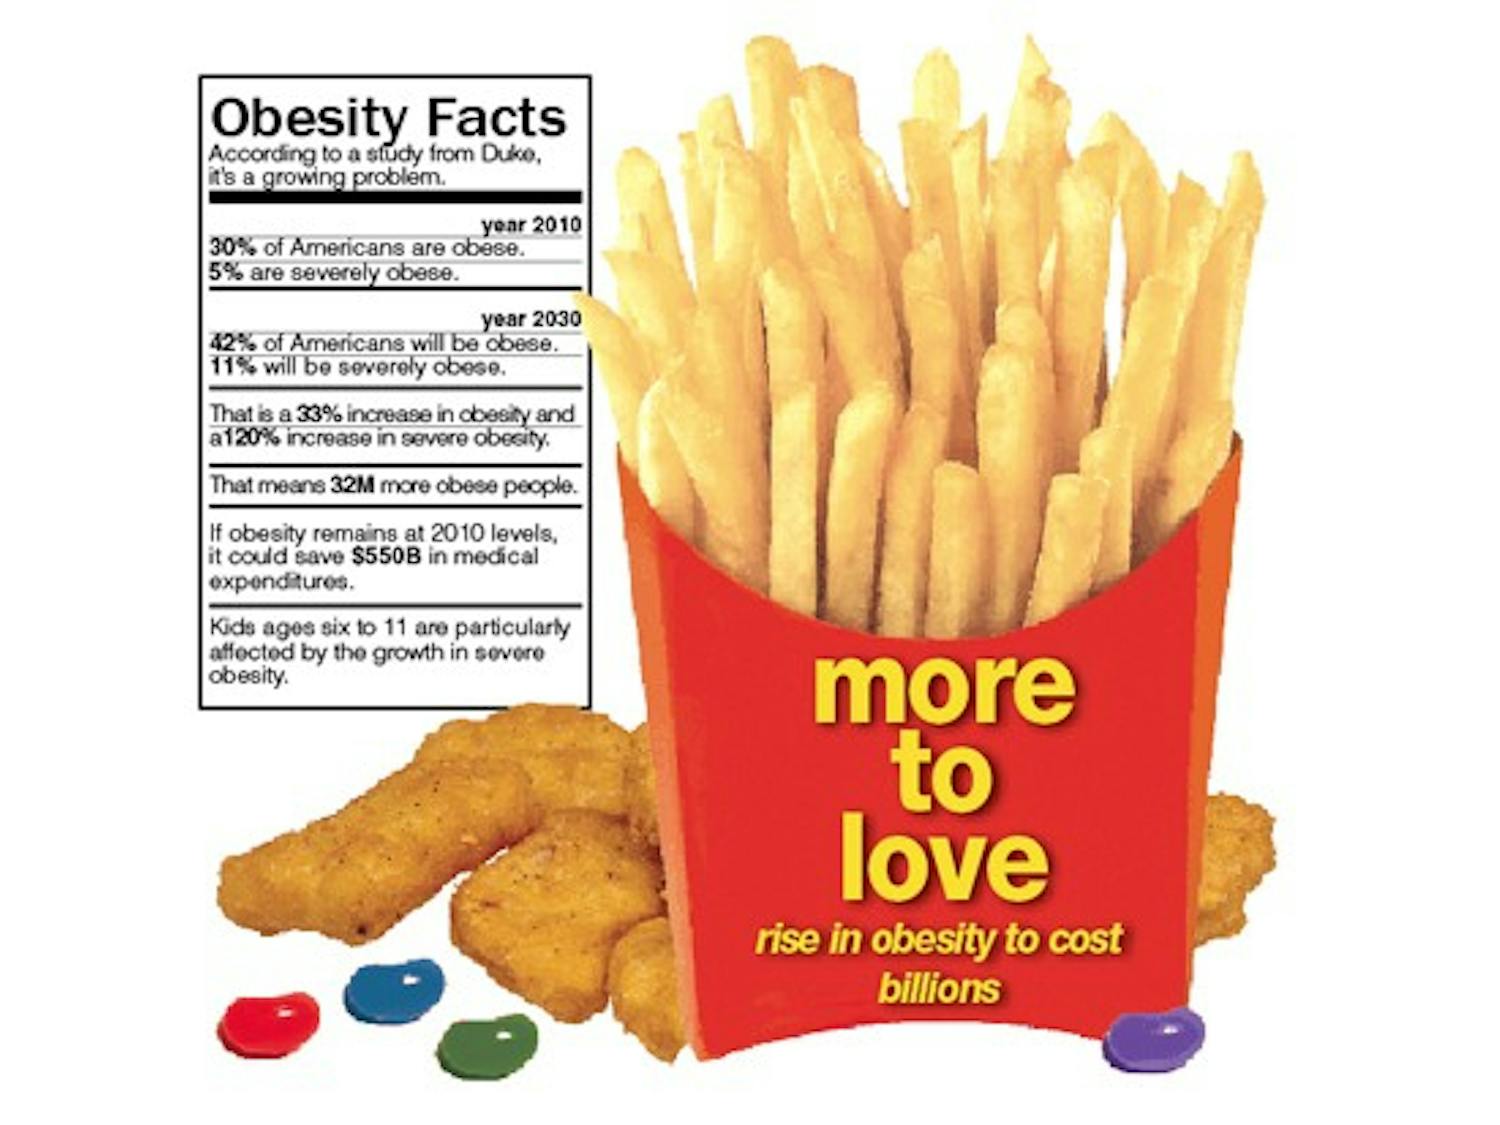 A study reveals that obesity levels will increase dramatically over the next two decades.